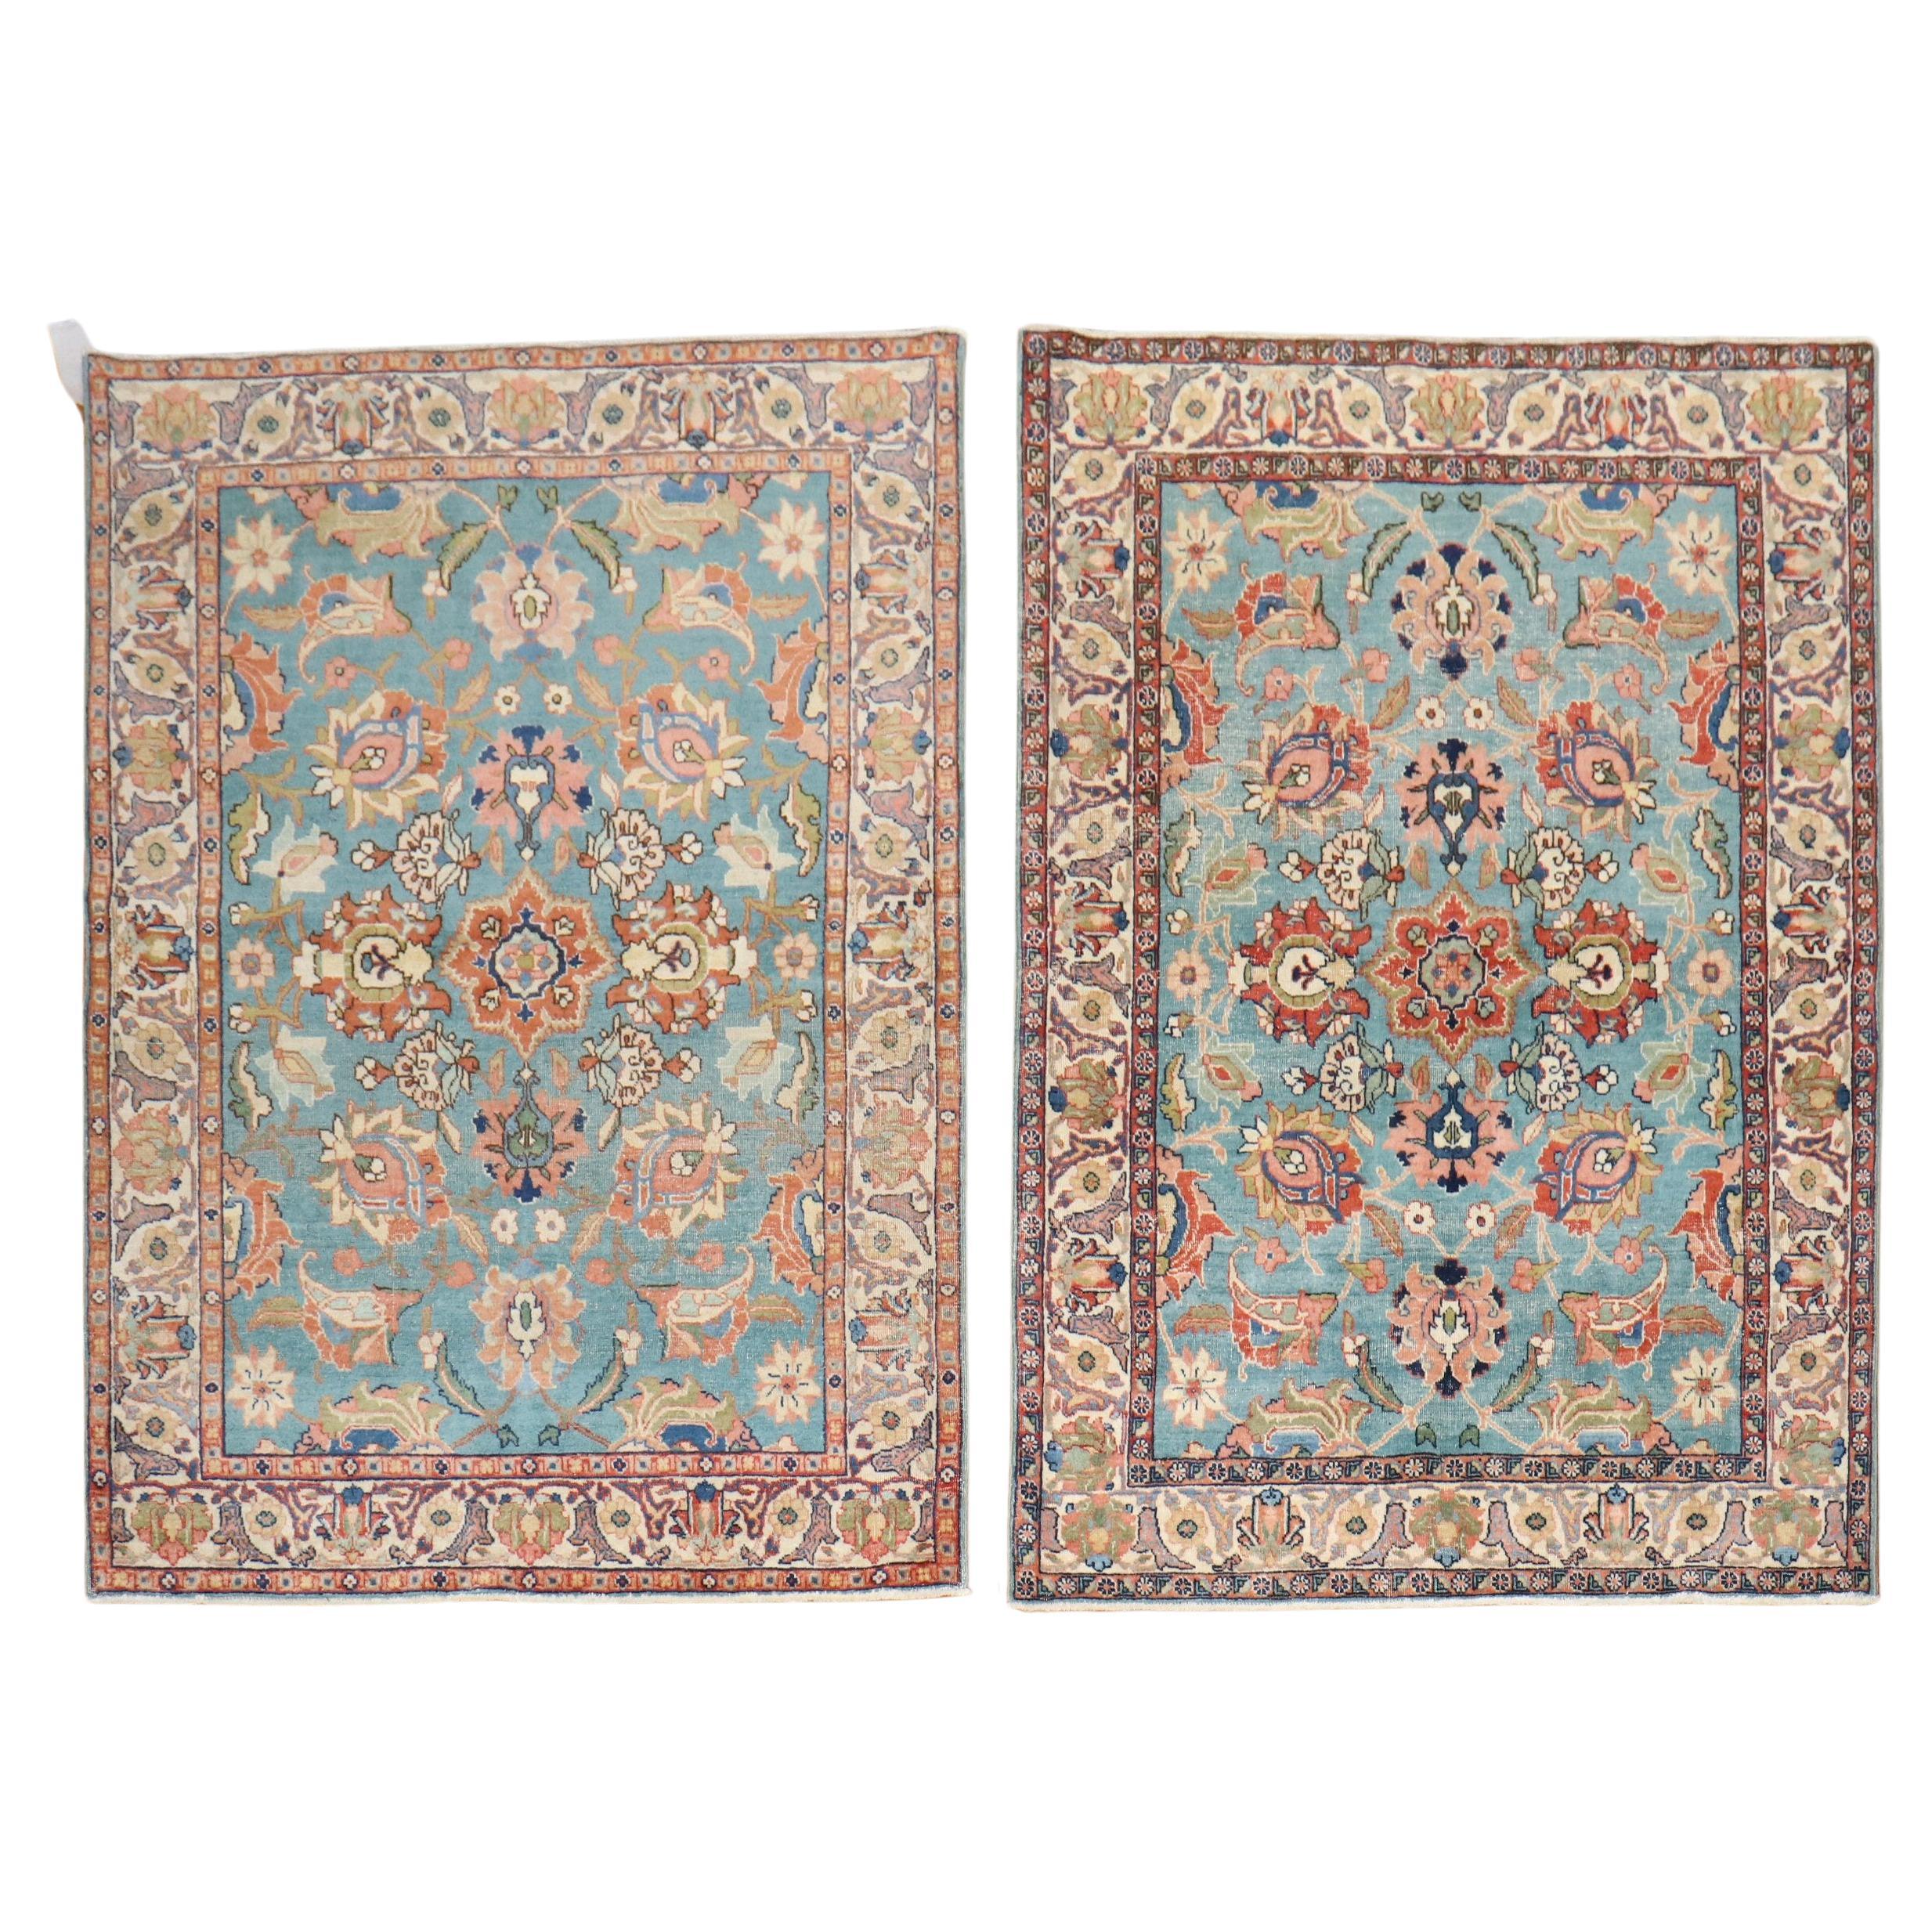 Zabihi Collection Pair of Antique Persian Tabriz Rugs